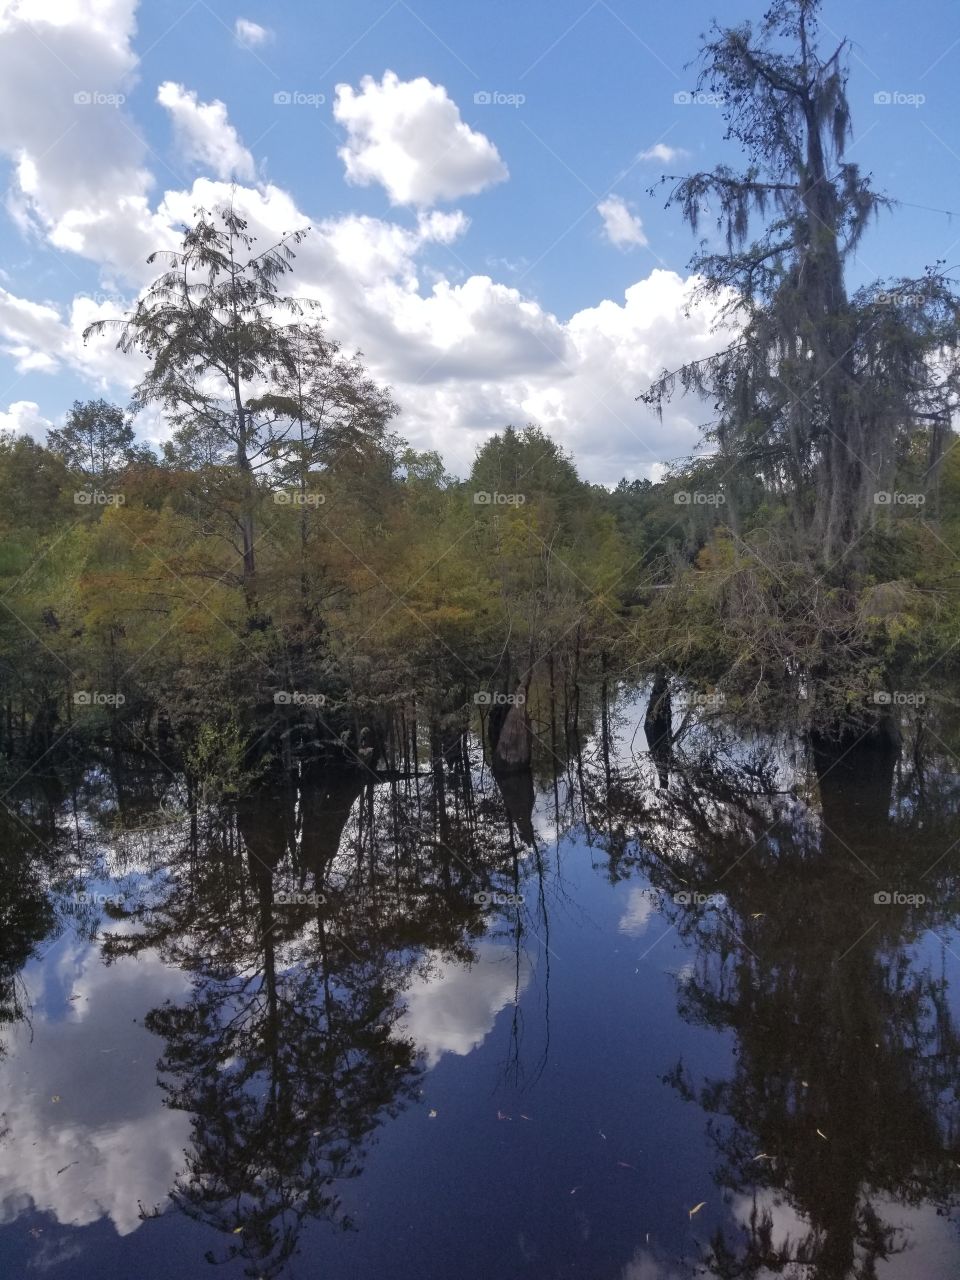 Chipola River Florida, shows Gods canvas of the reflections of clouds, sky and trees